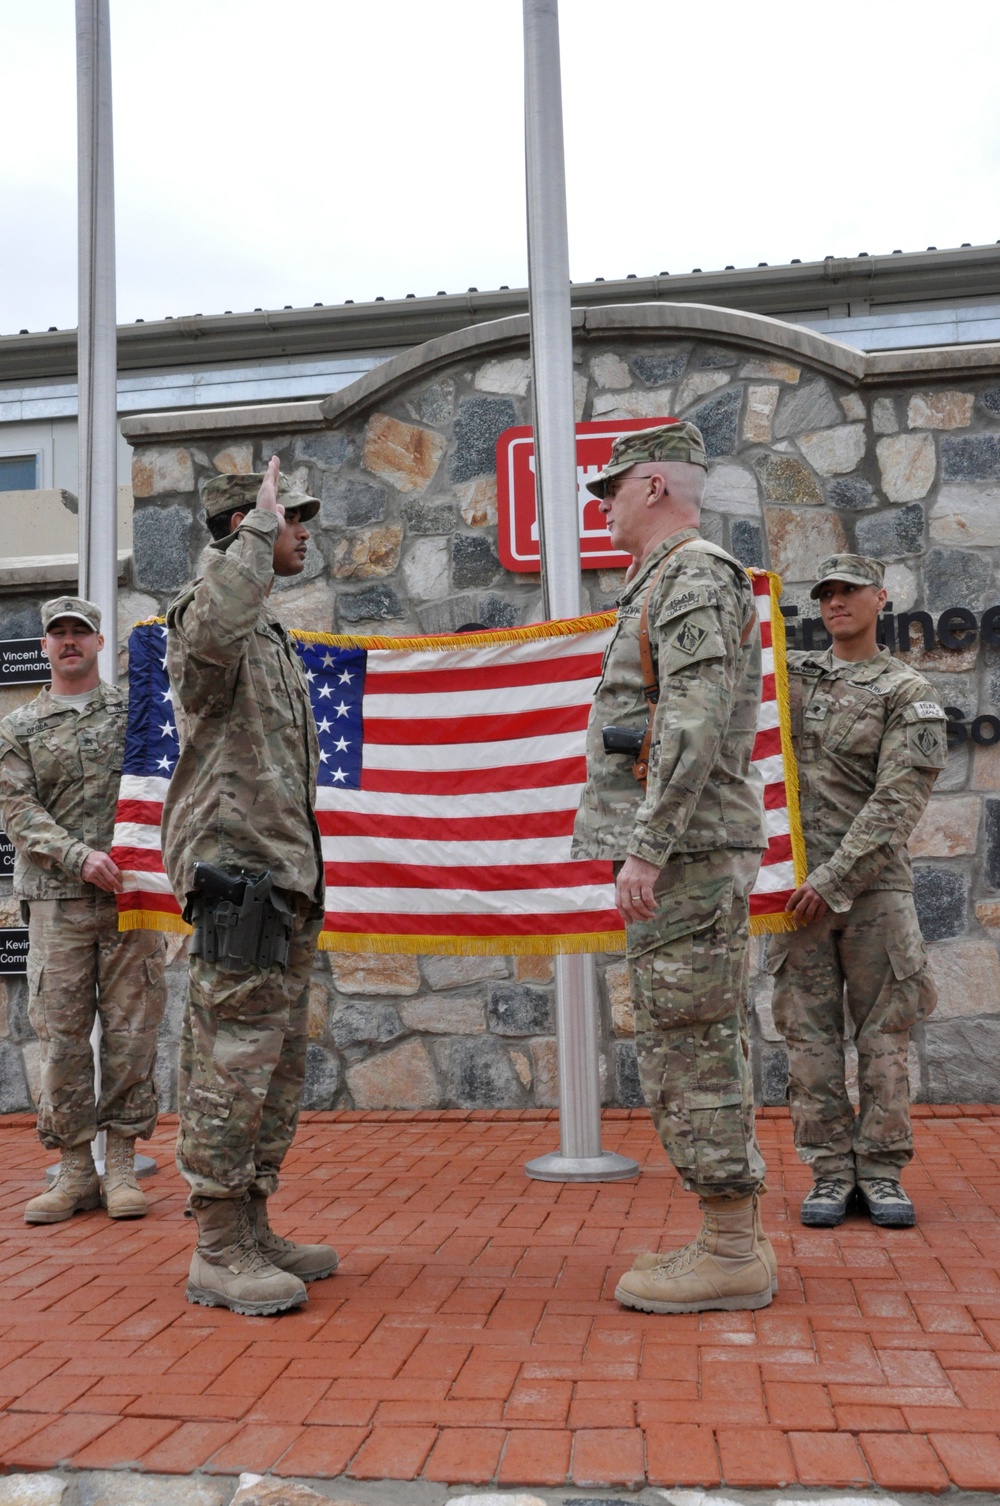 USACE Maj. Gen. administers oath of enlistment at Kandahar Airfield